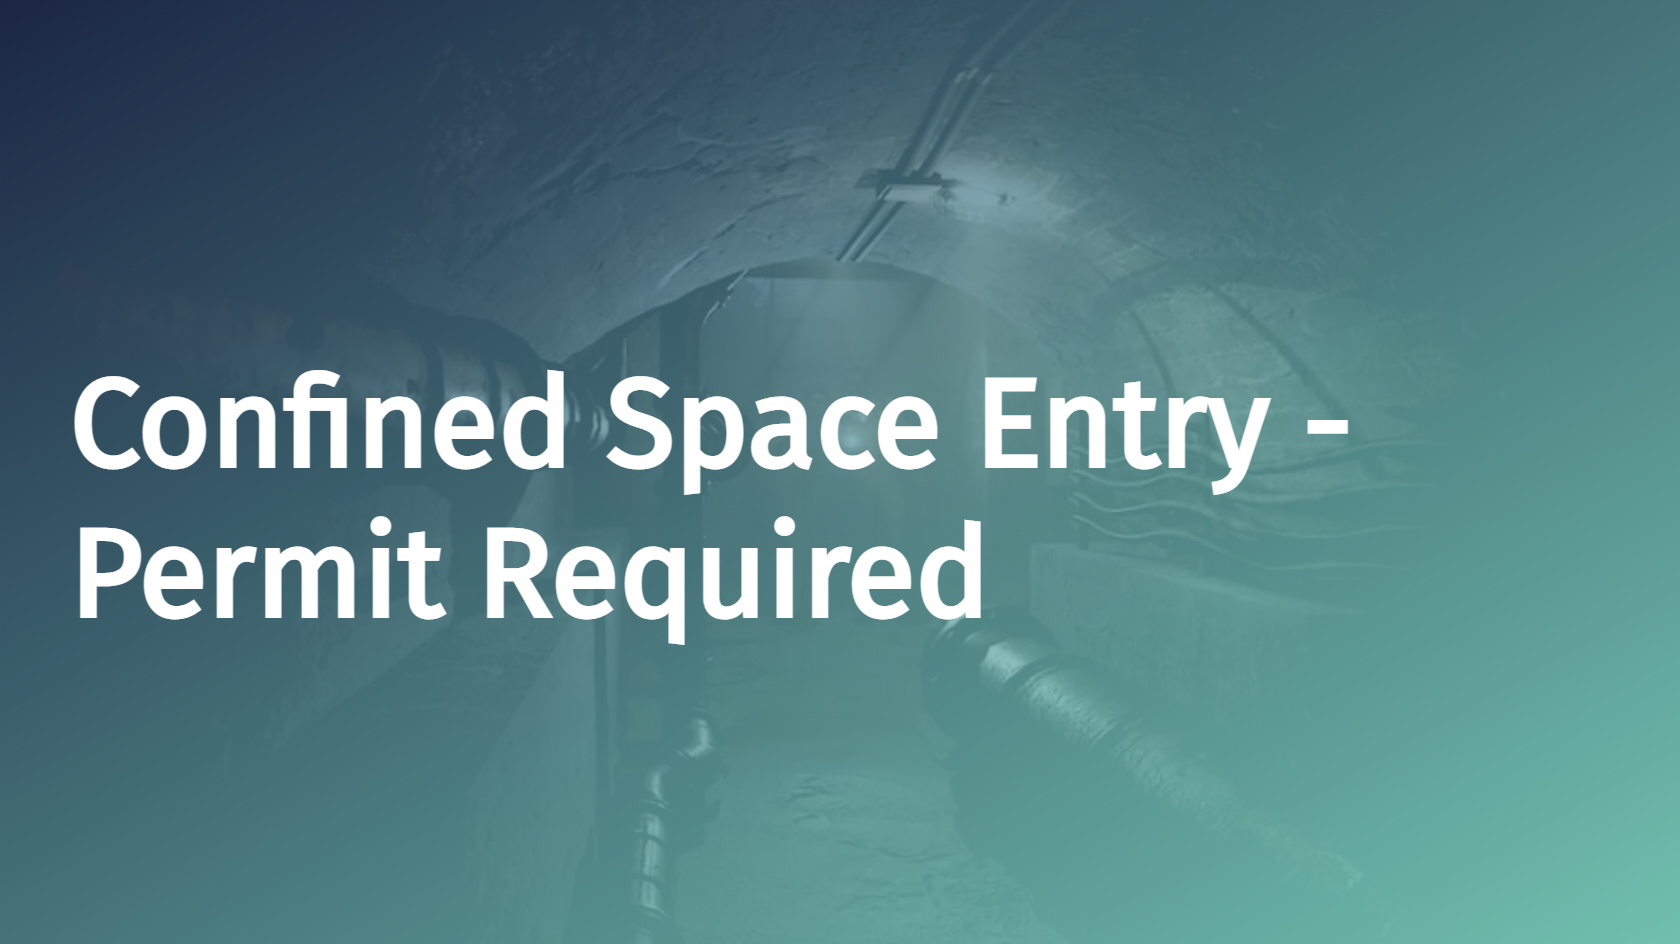 Confined Space Entry - Permit Required